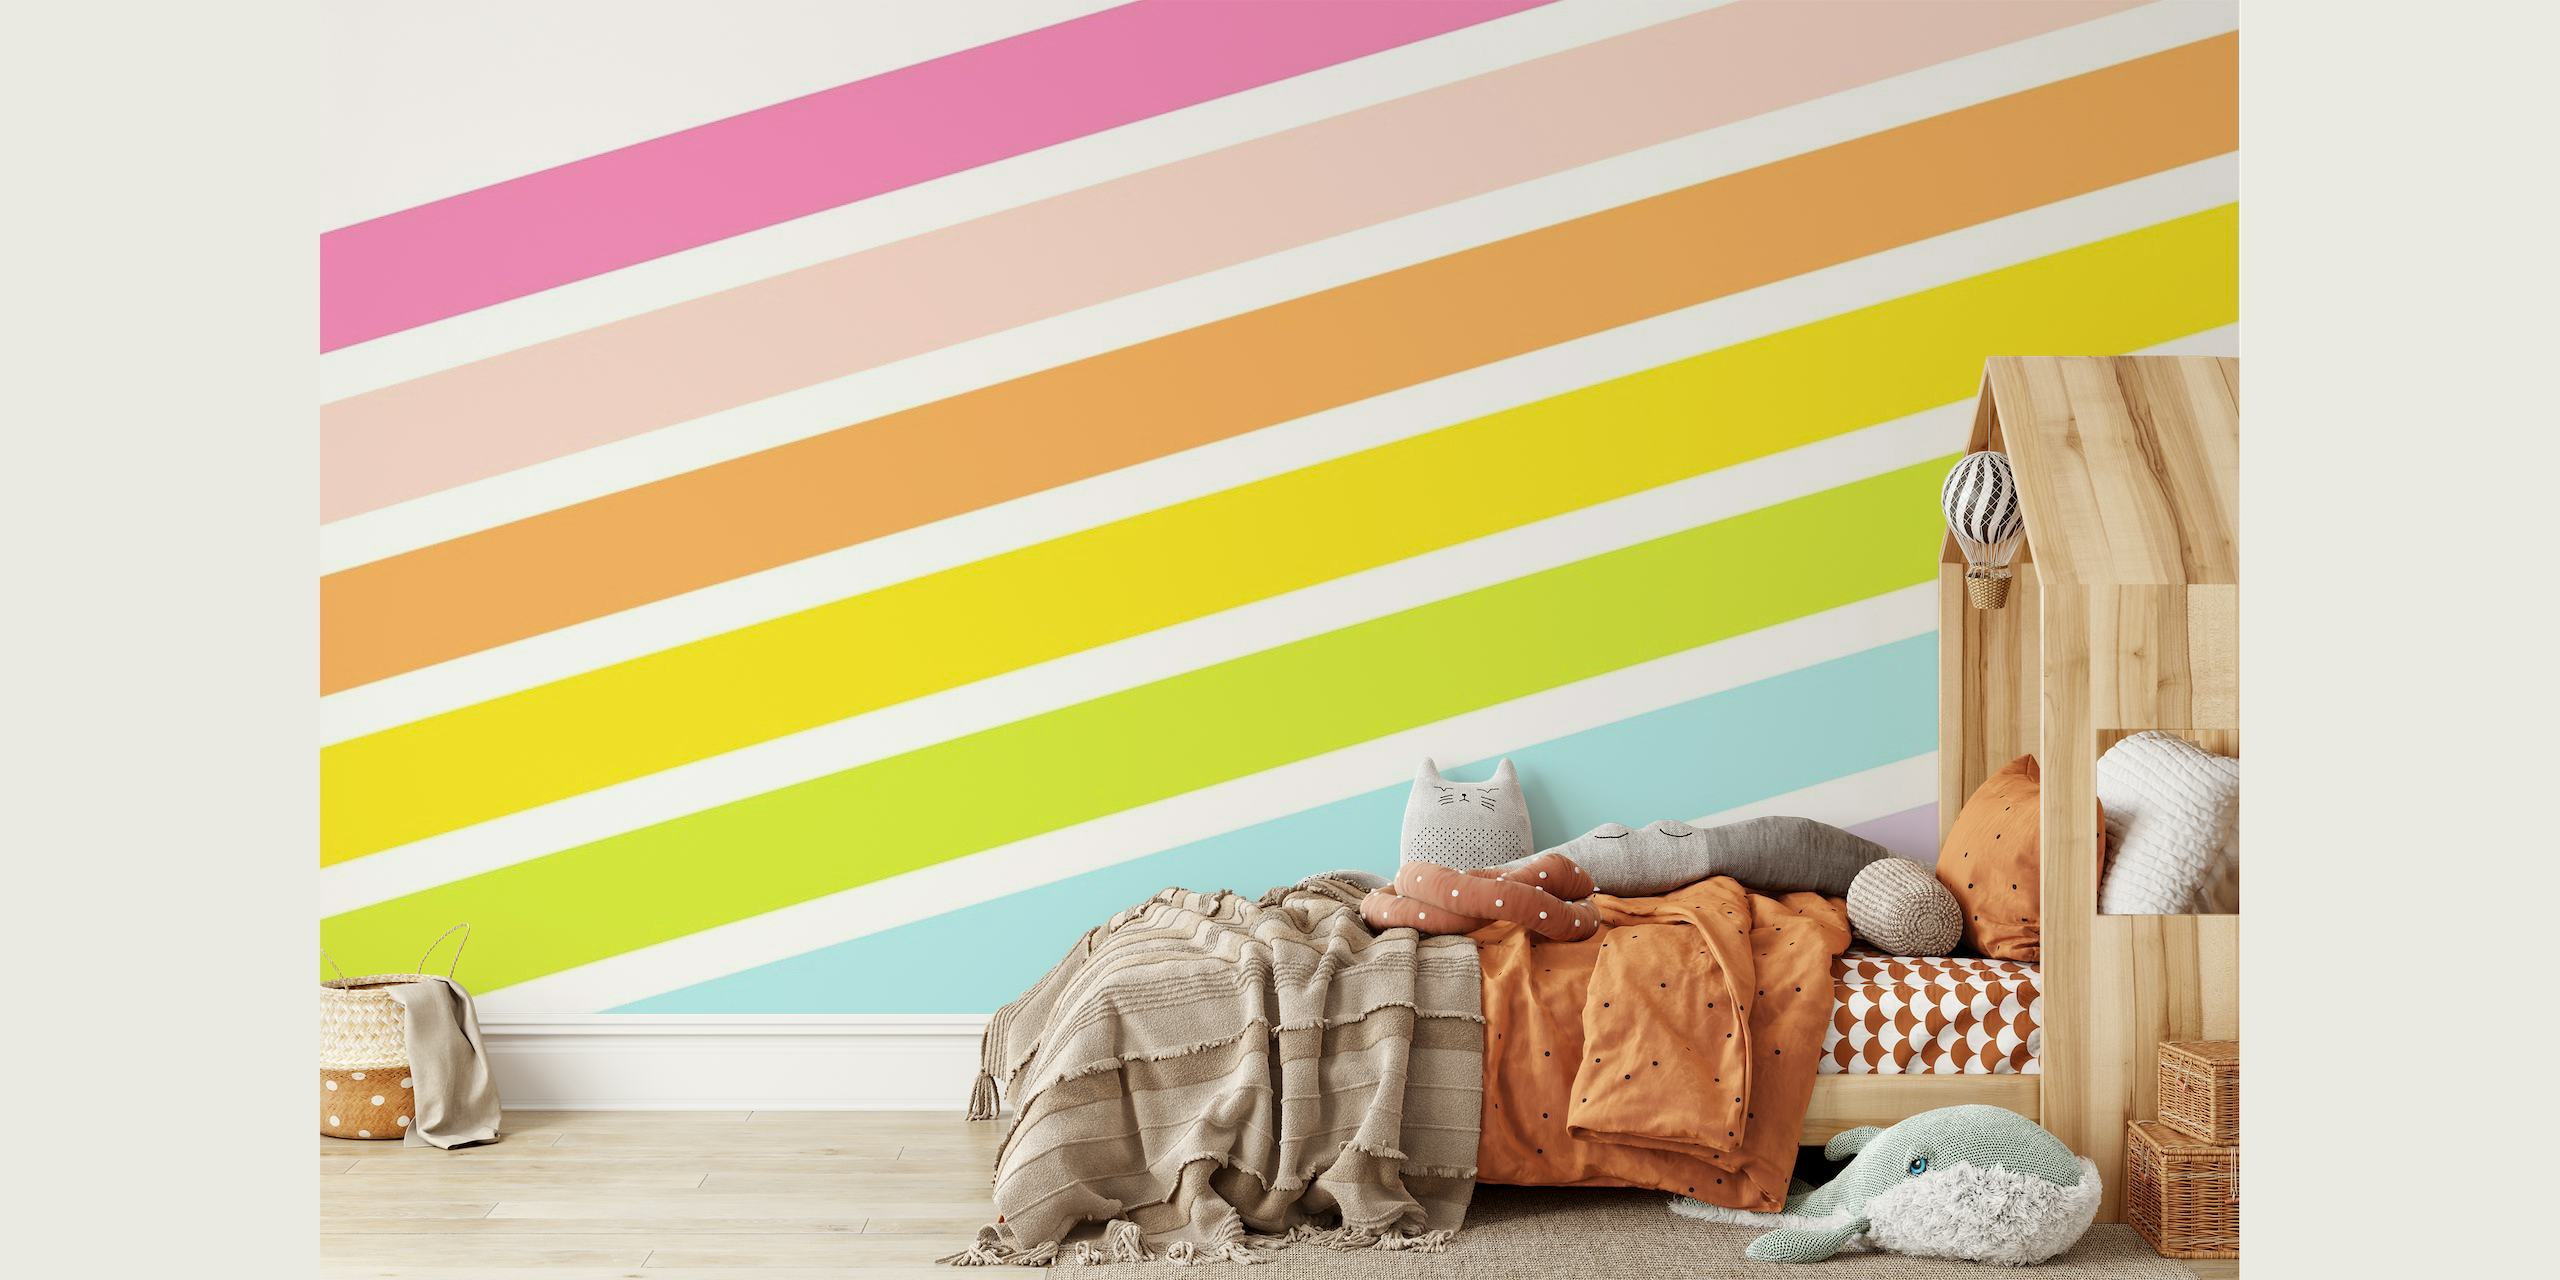 Wall mural of vibrant, colorful rainbow stripes in a diagonal pattern